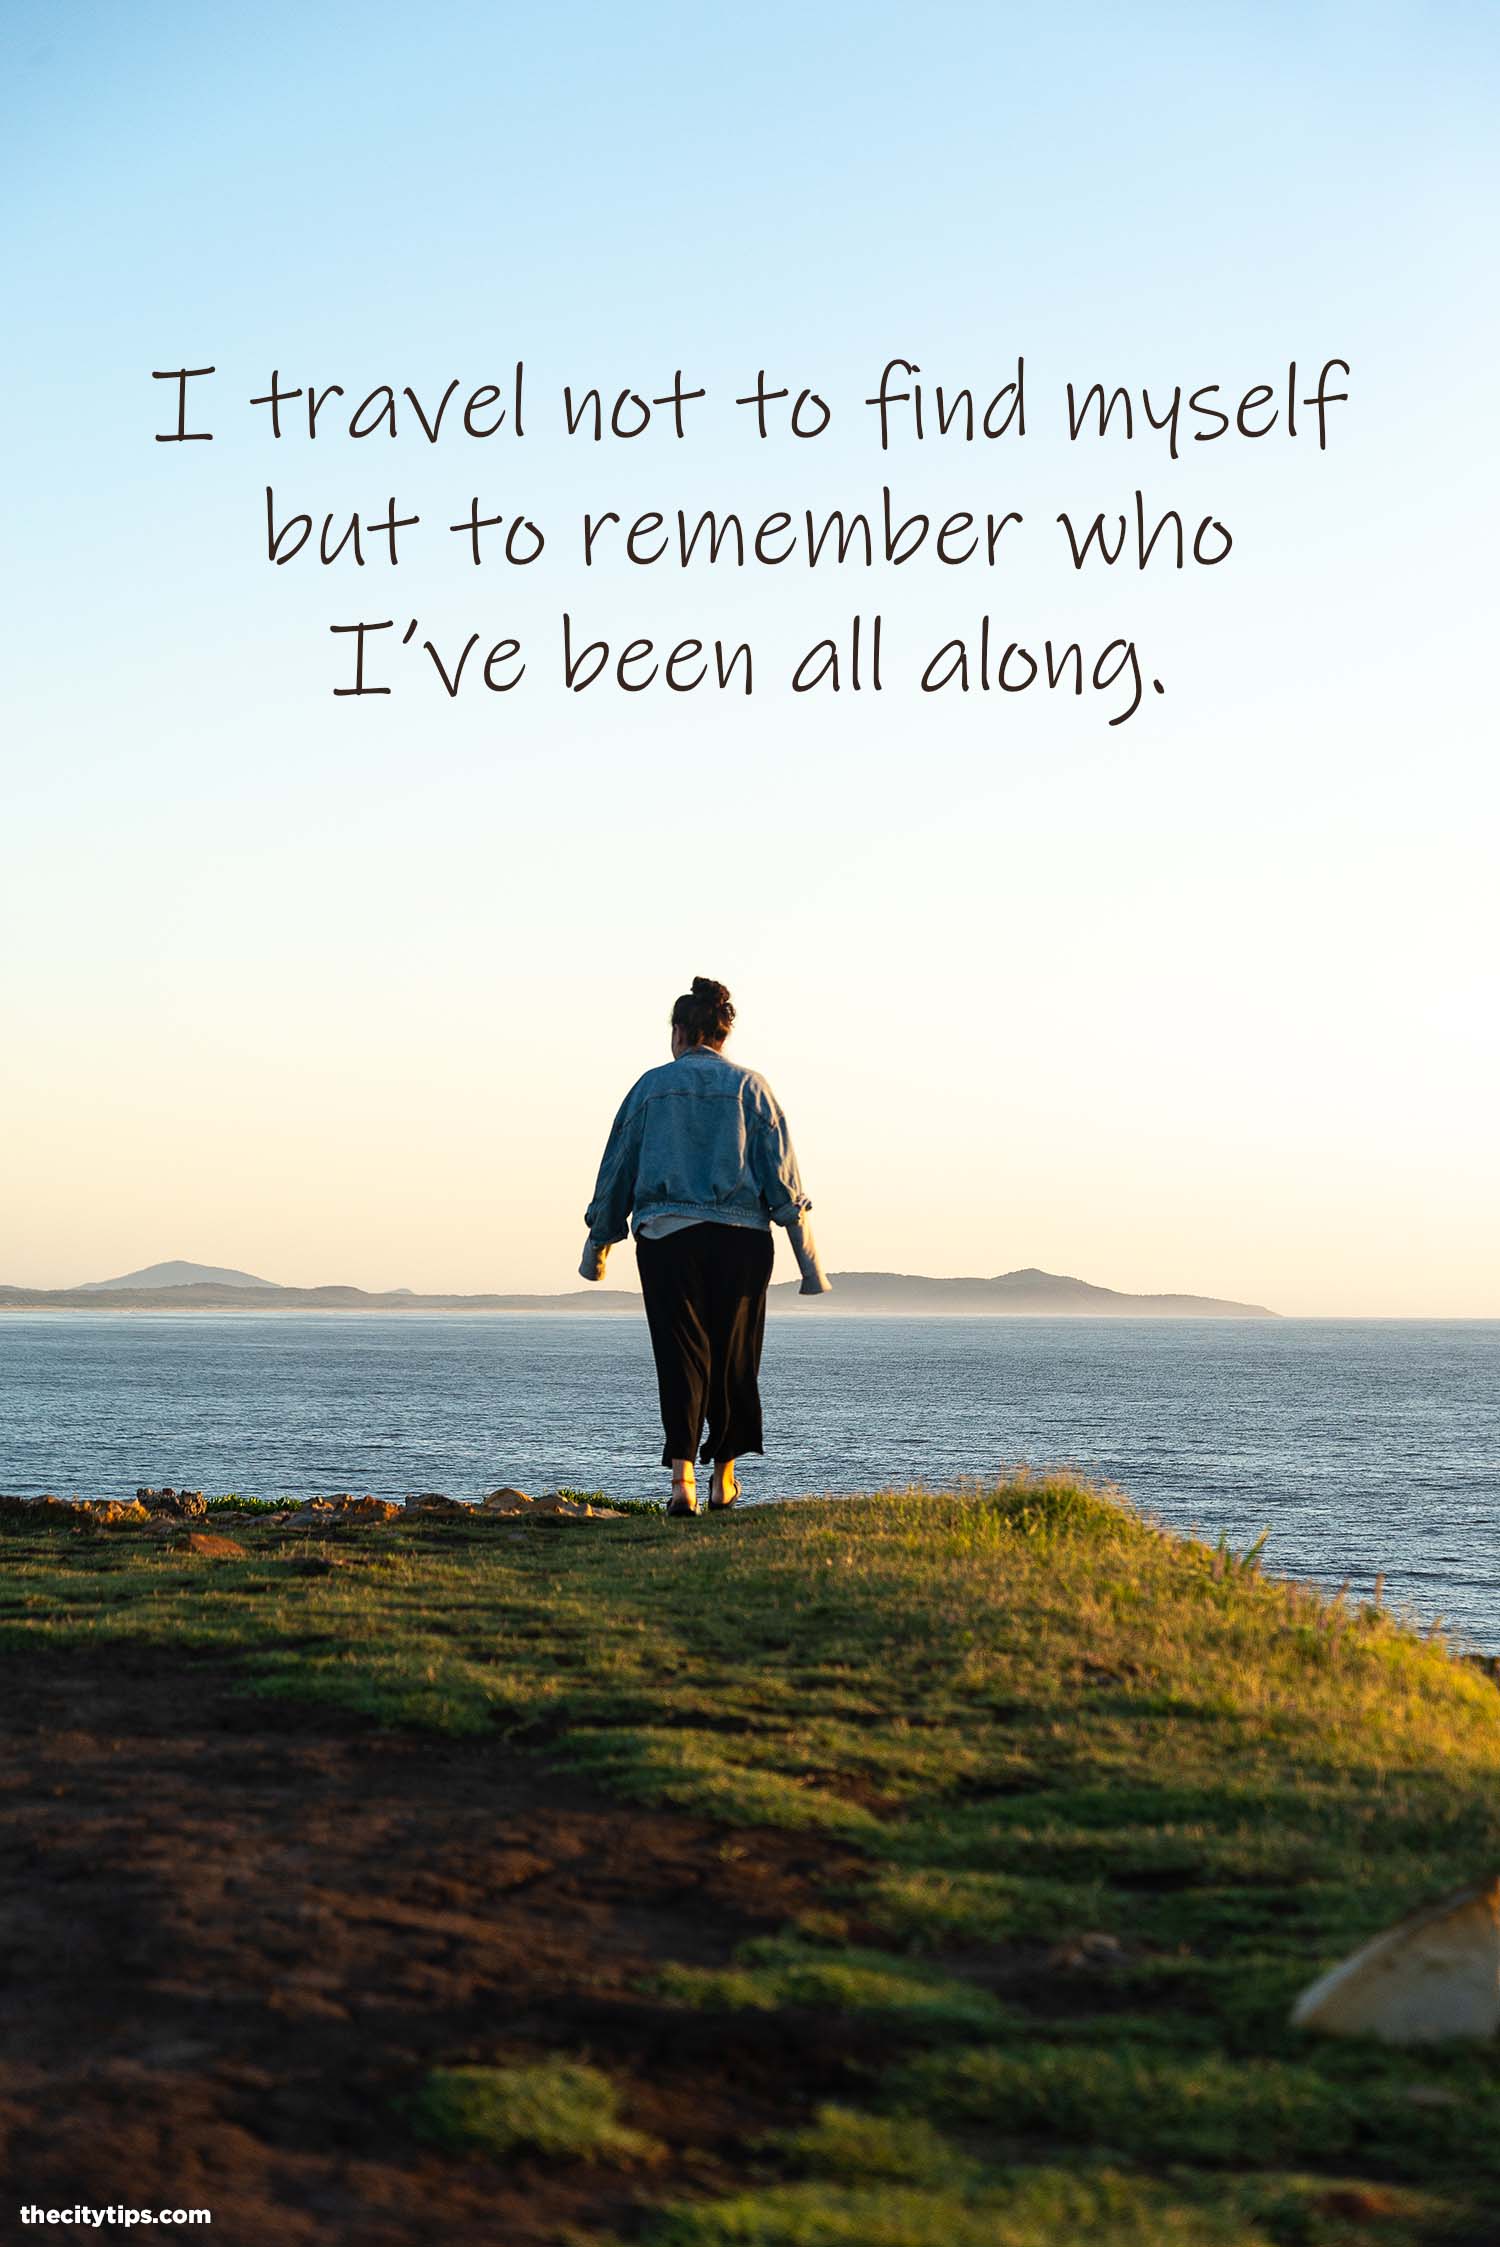 "I travel not to find myself but to remember who I've been all along." by Anonymous